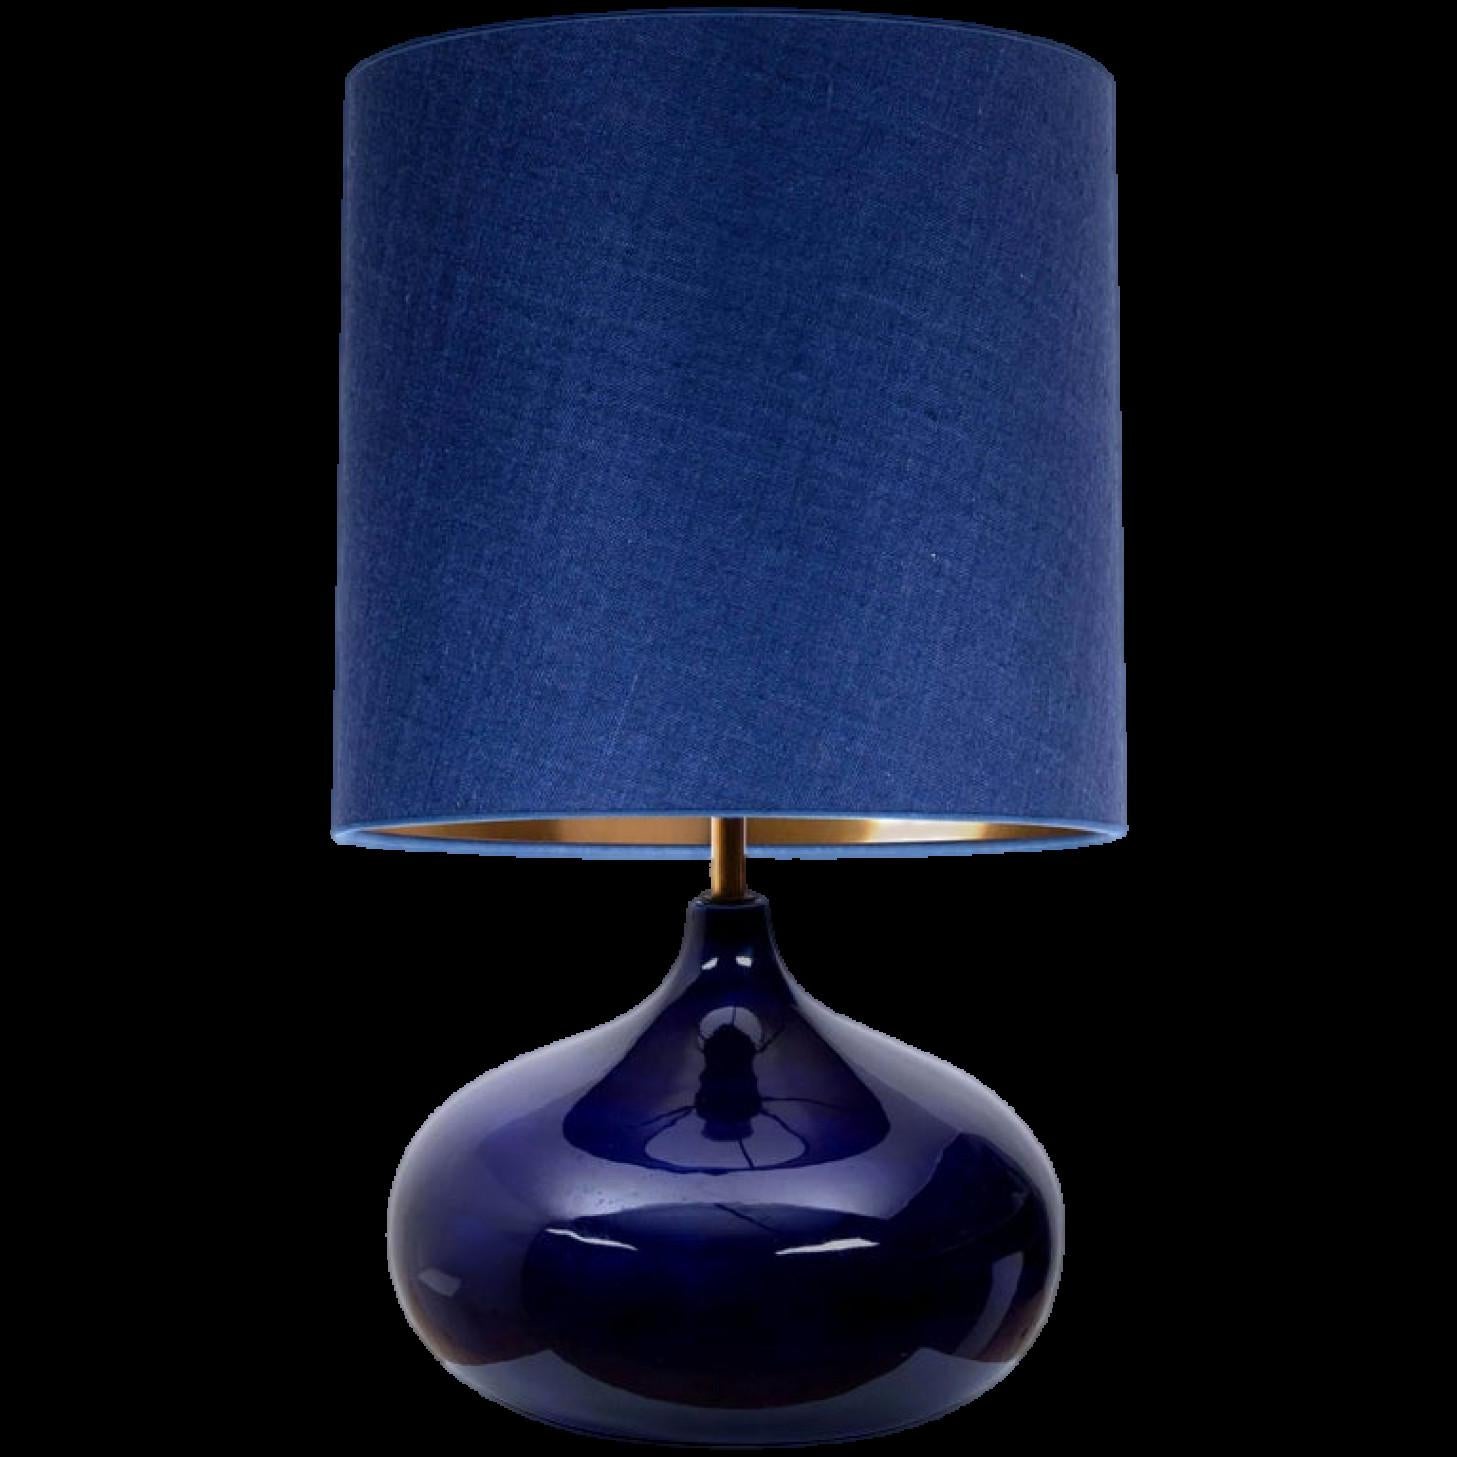 Ceramic table lamp, Denmark, 1960s. A sculptural high-end piece made of handmade ceramic in rich glazed dark blue tones. With a new custom made blue silk lamp shade with warm gold inner, shade by René Houben.

The lamp is in perfect vintage